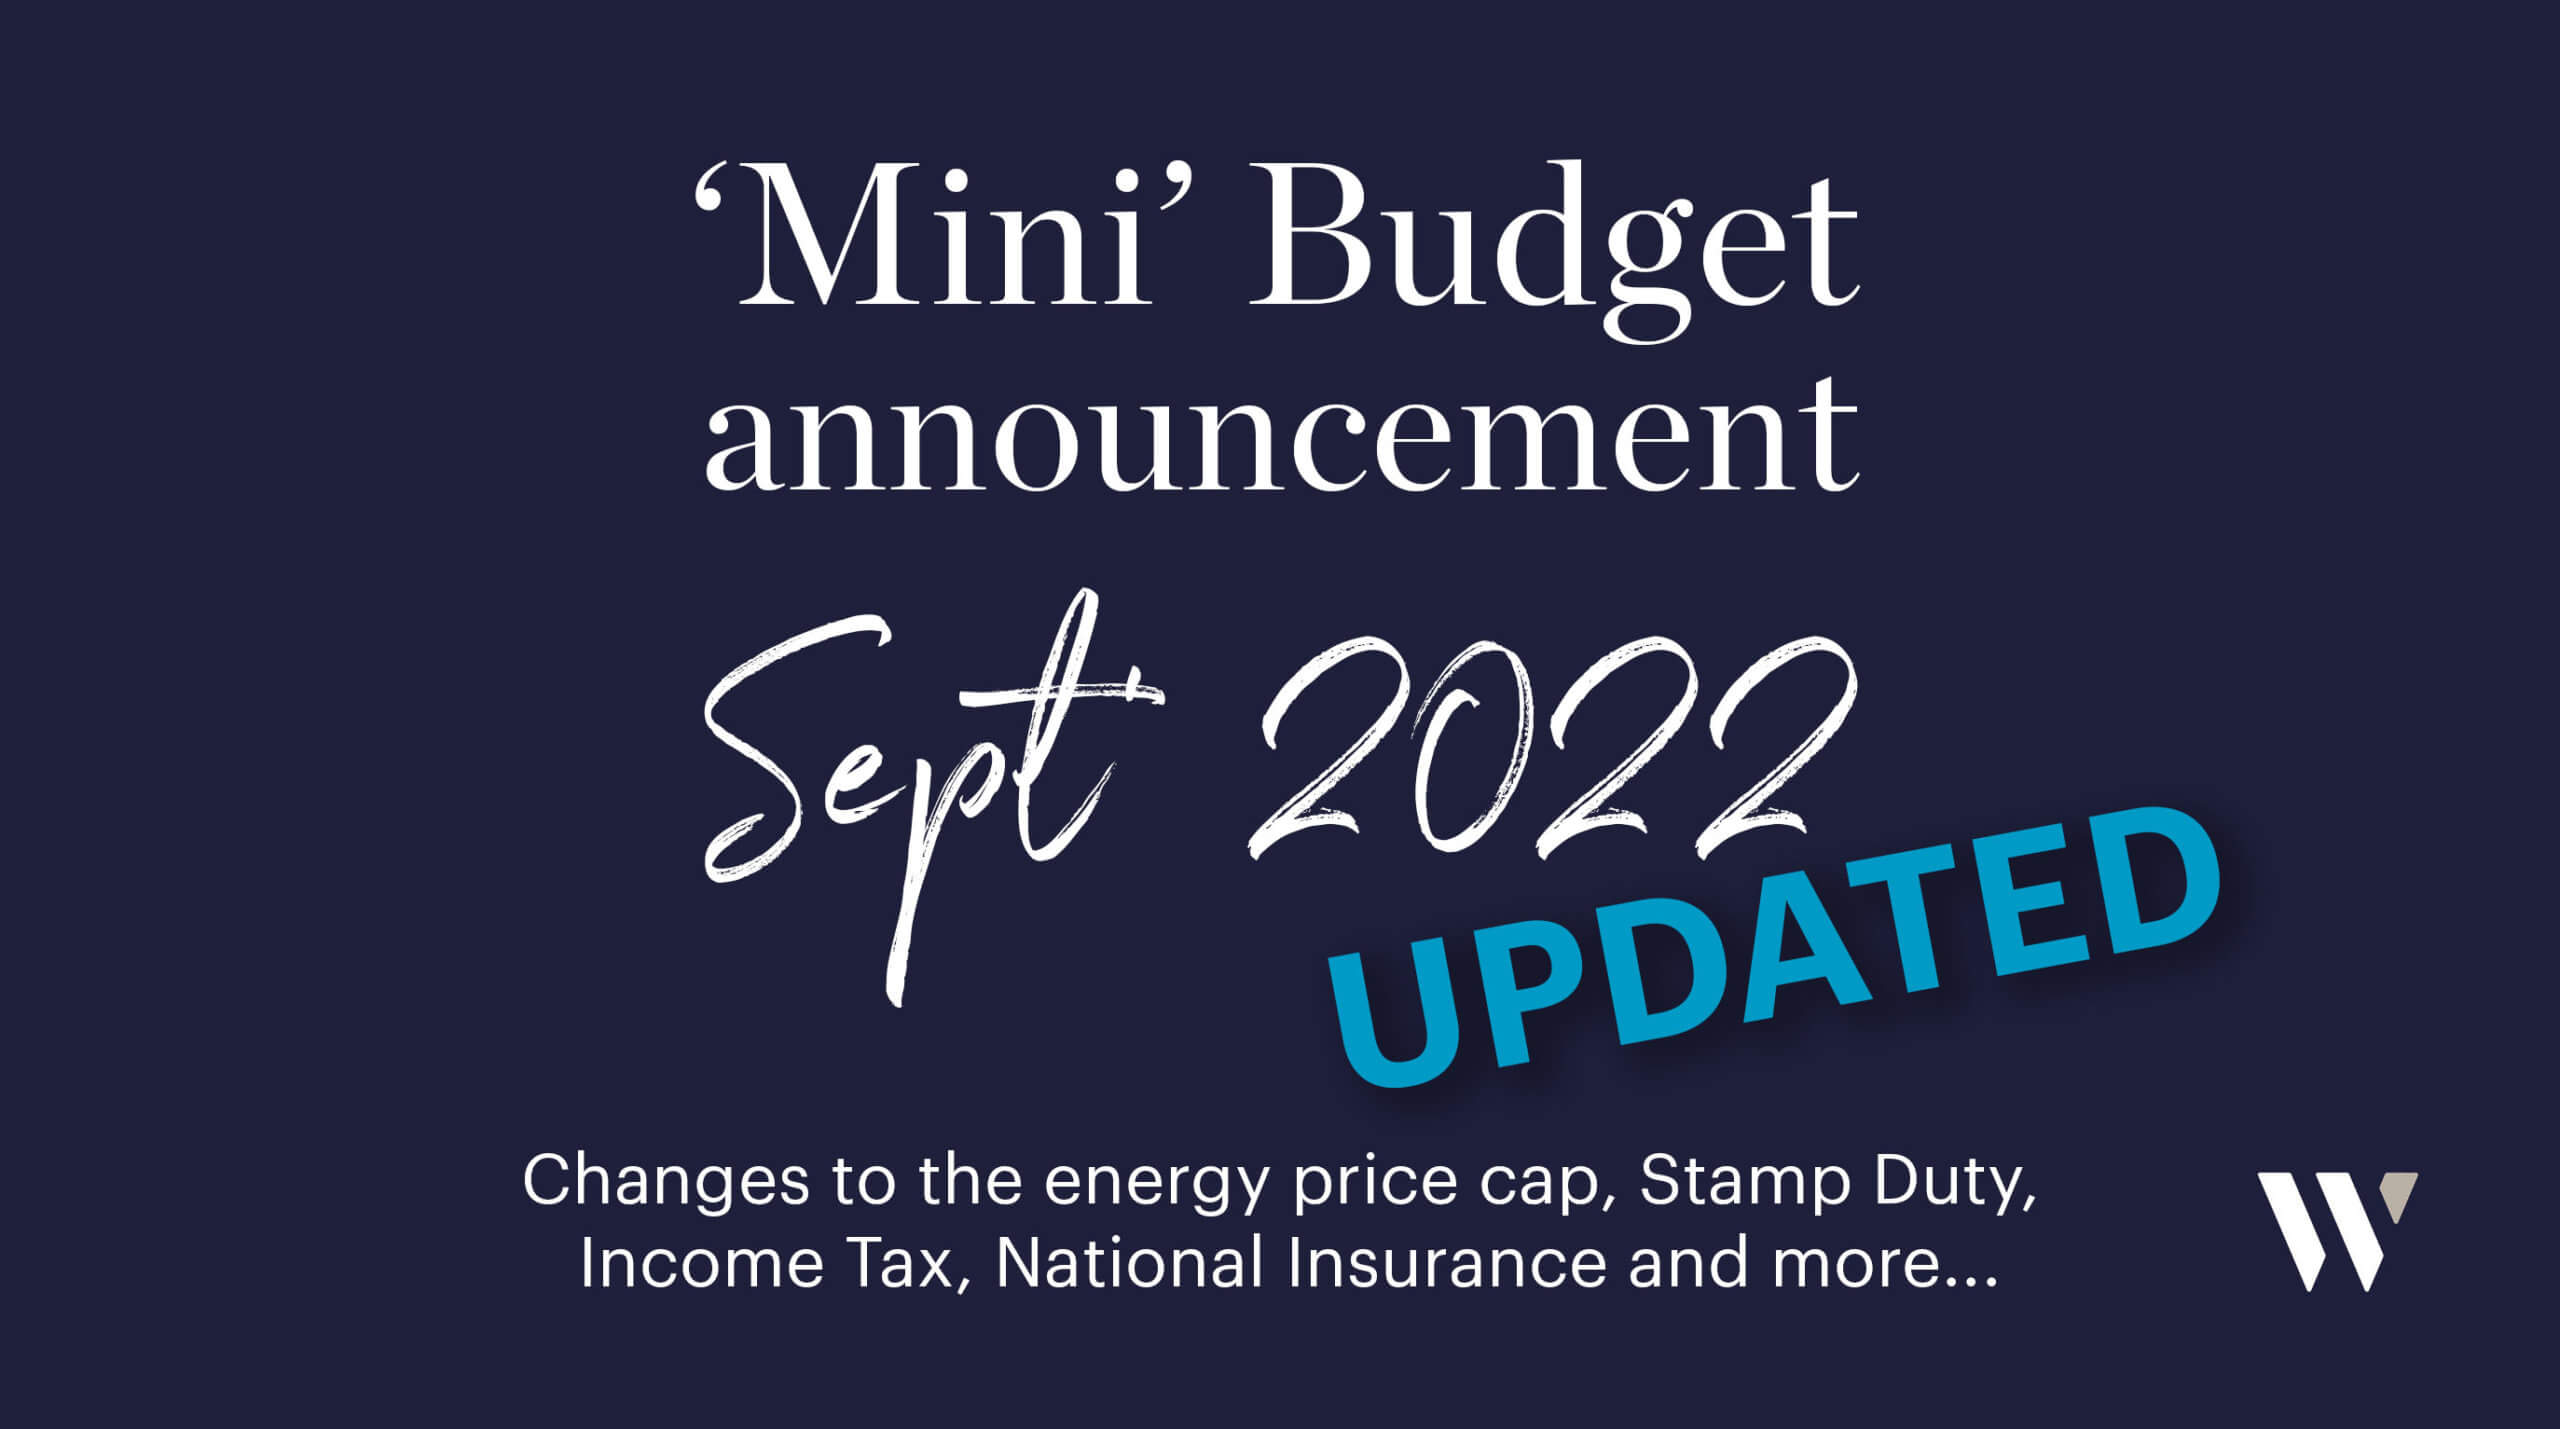 Mini Budget 2022 update - what's changed? | Whyfield